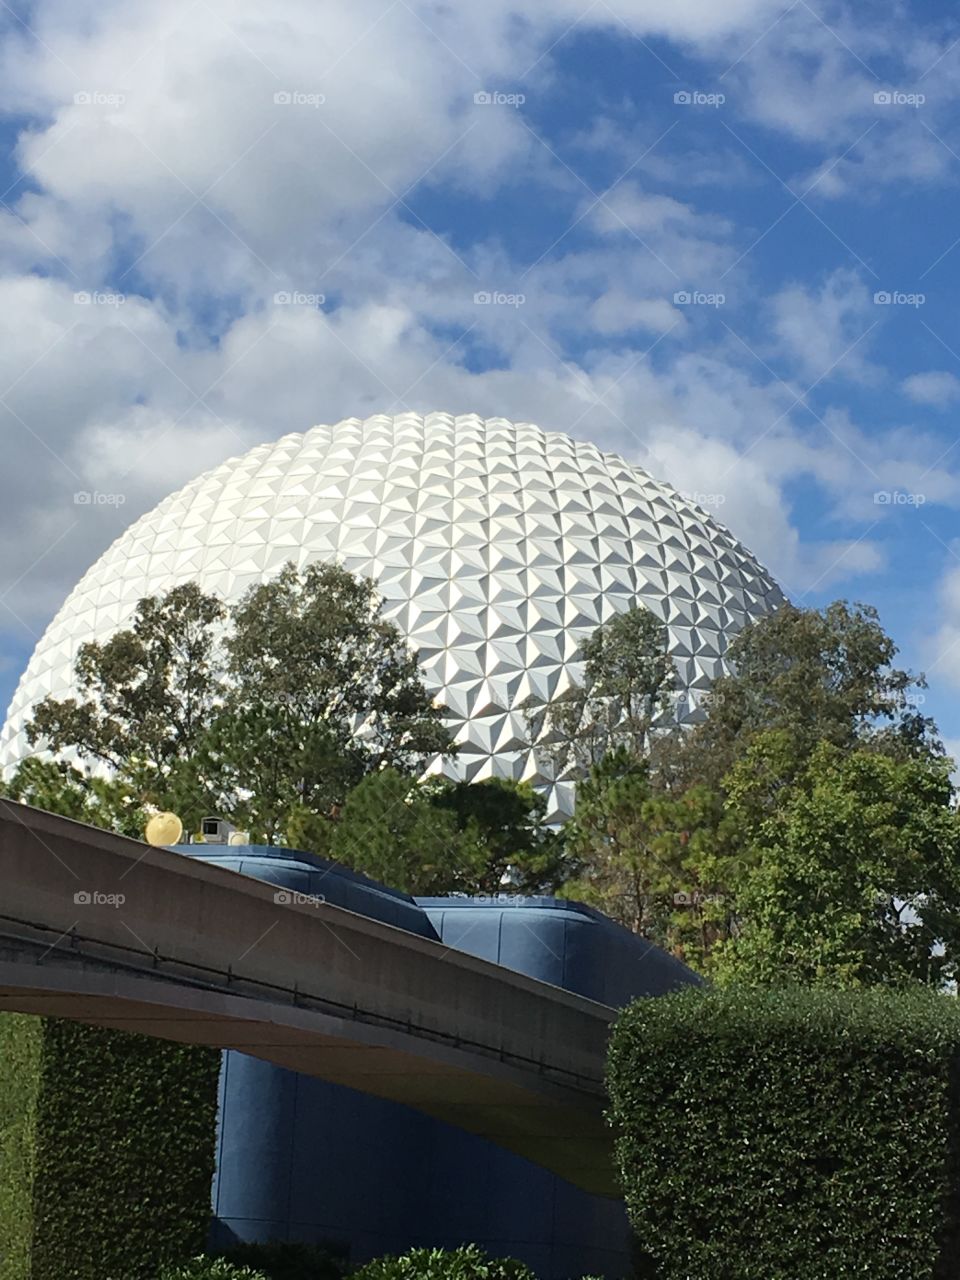 Monorail track and Spaceship Earth - Epcot